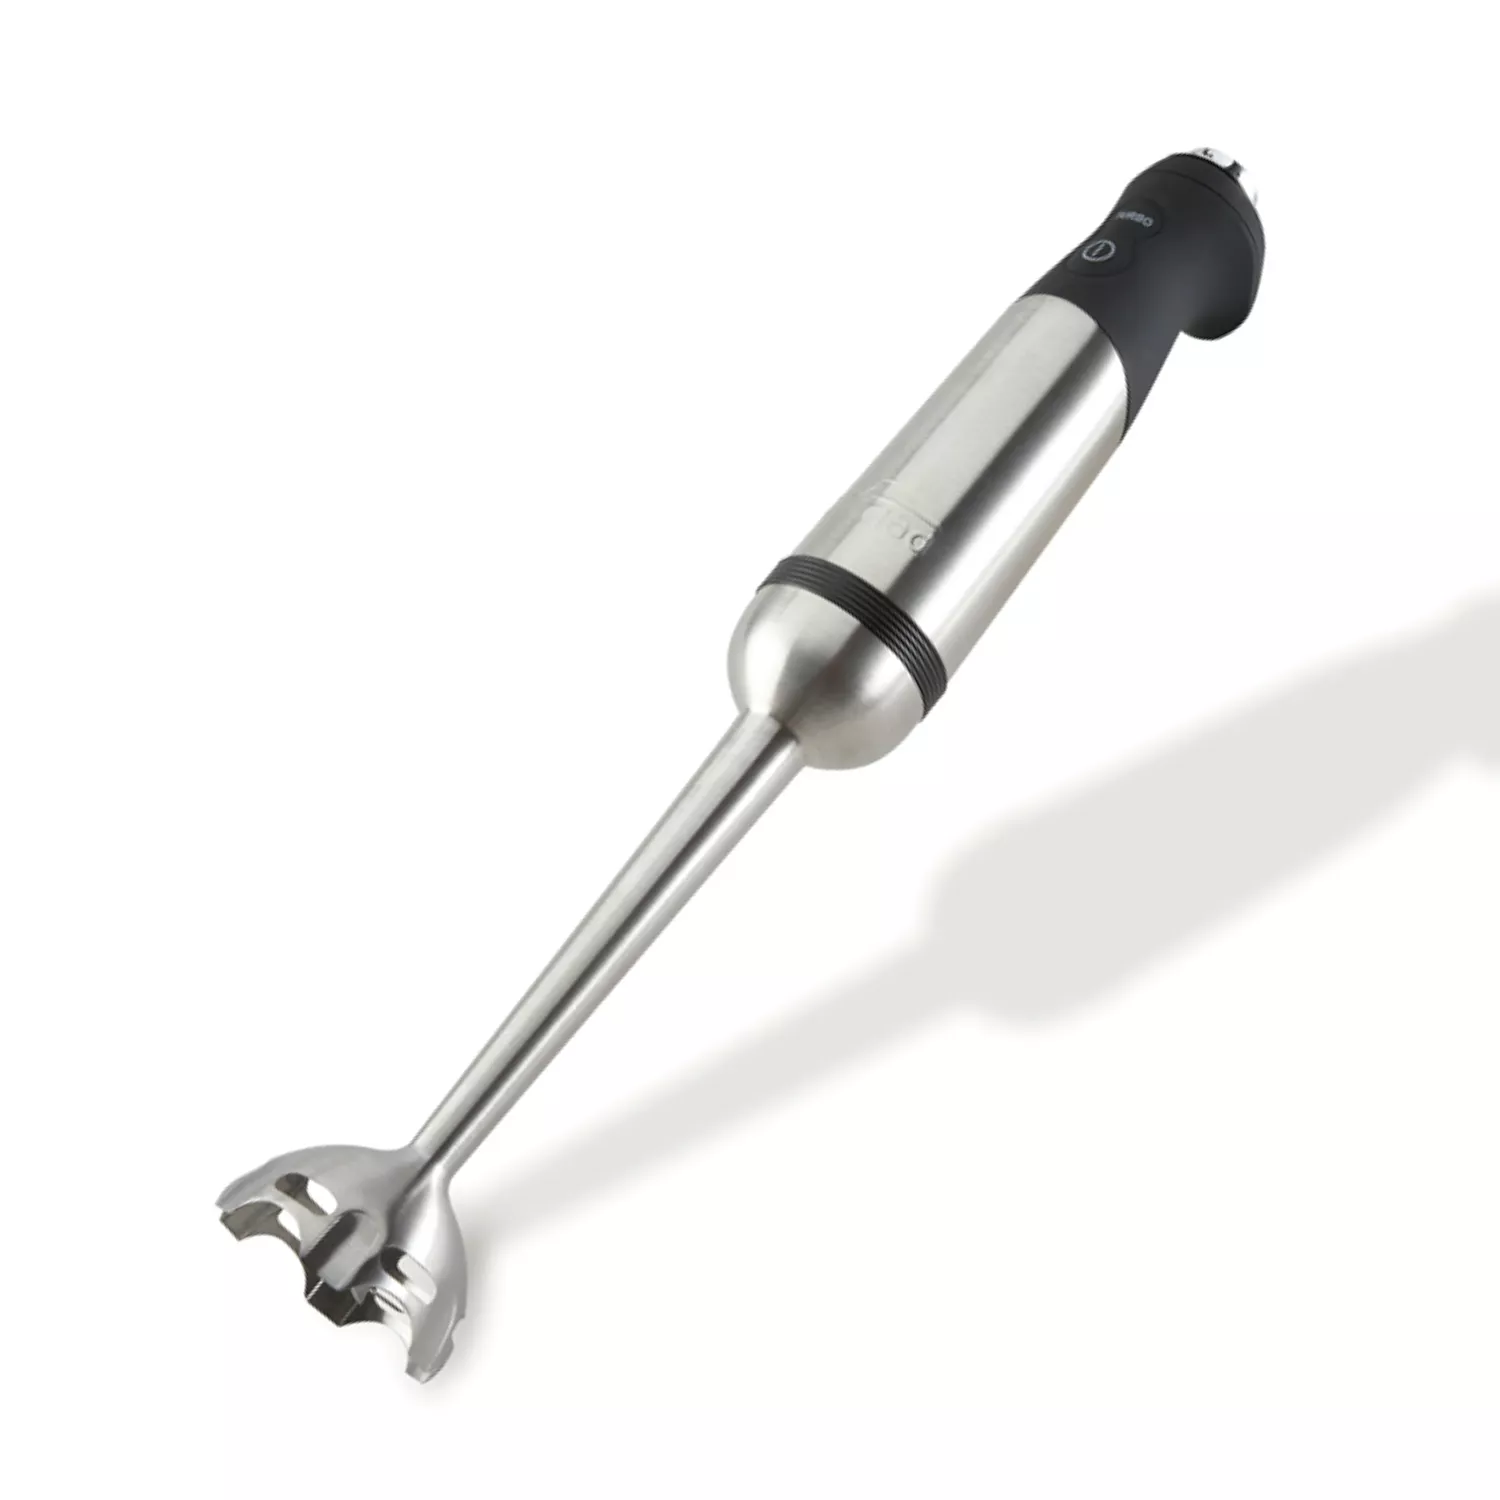 The All-Clad Variable Speed Immersion Blender 